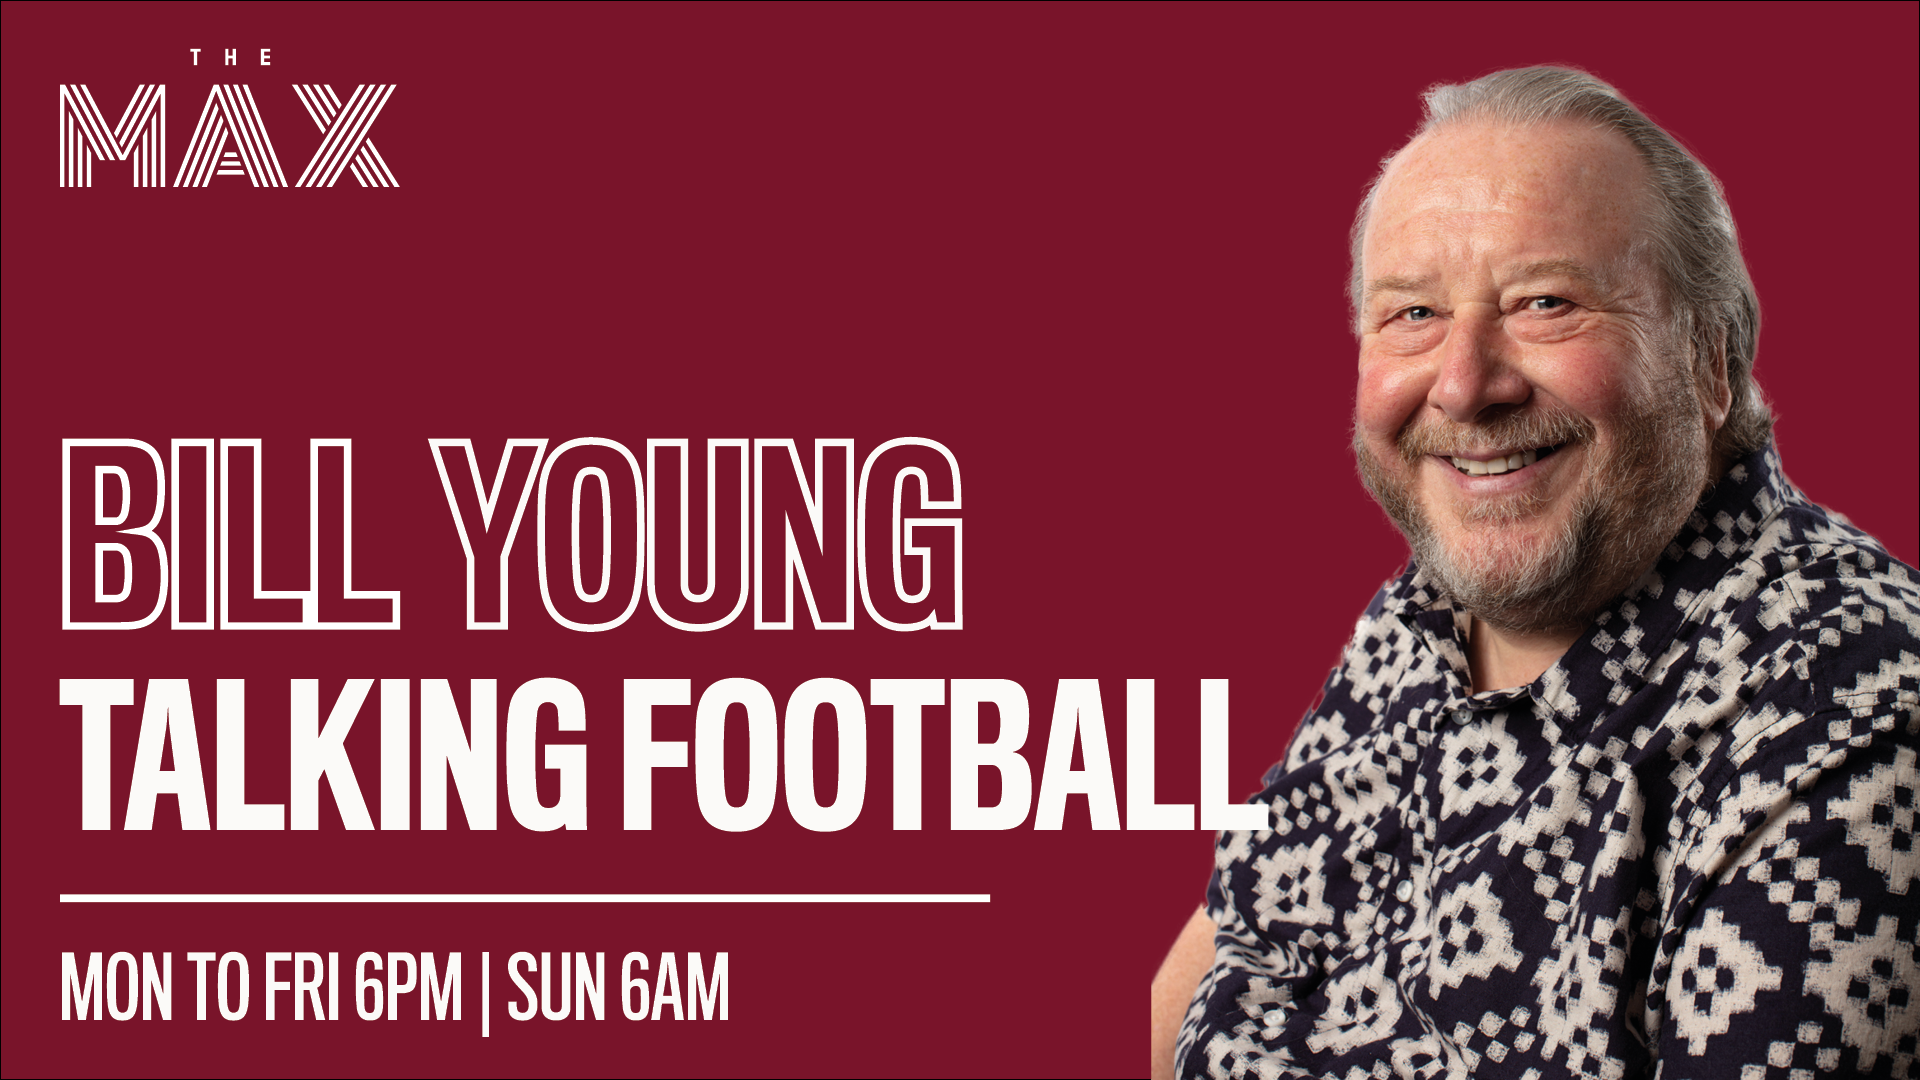 Talking Football with Bill Young - Thursday 15th April